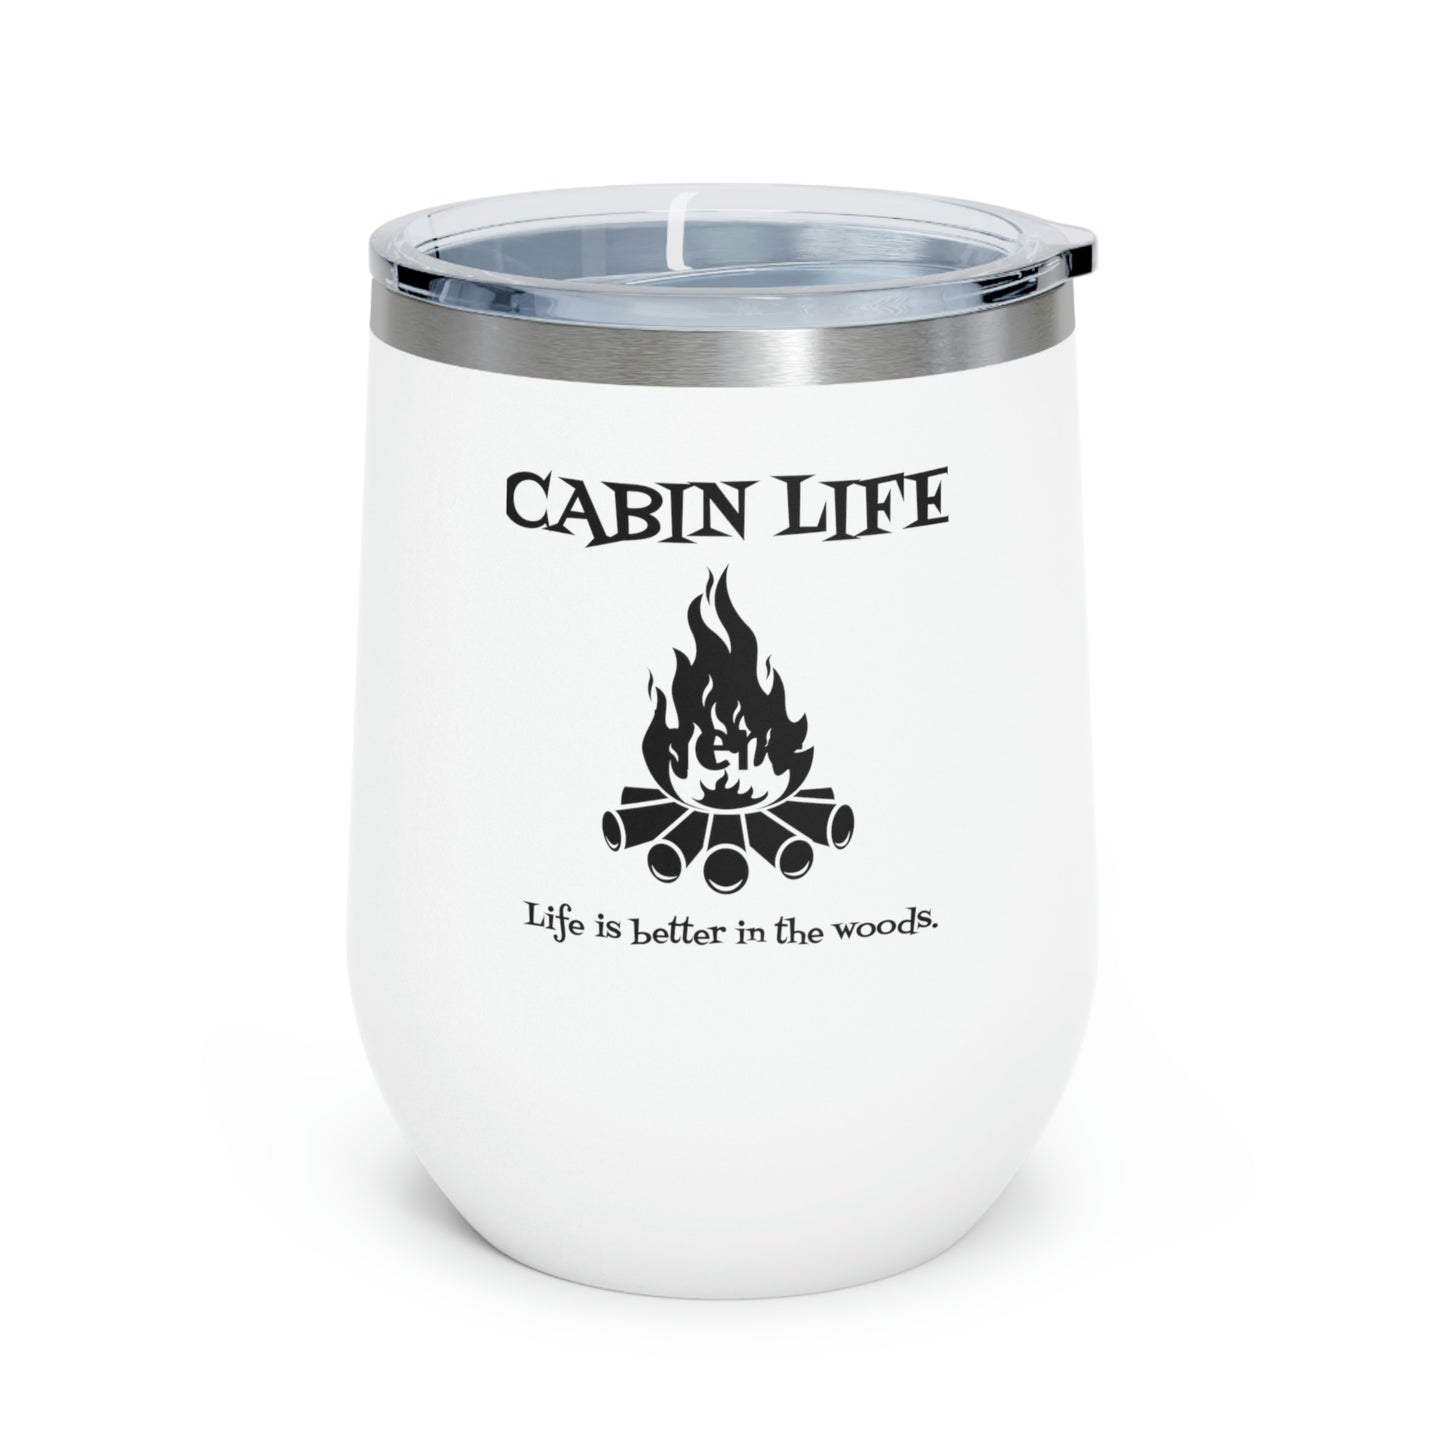 Cabin Life - Life is better in the woods 12oz Insulated Wine Tumbler